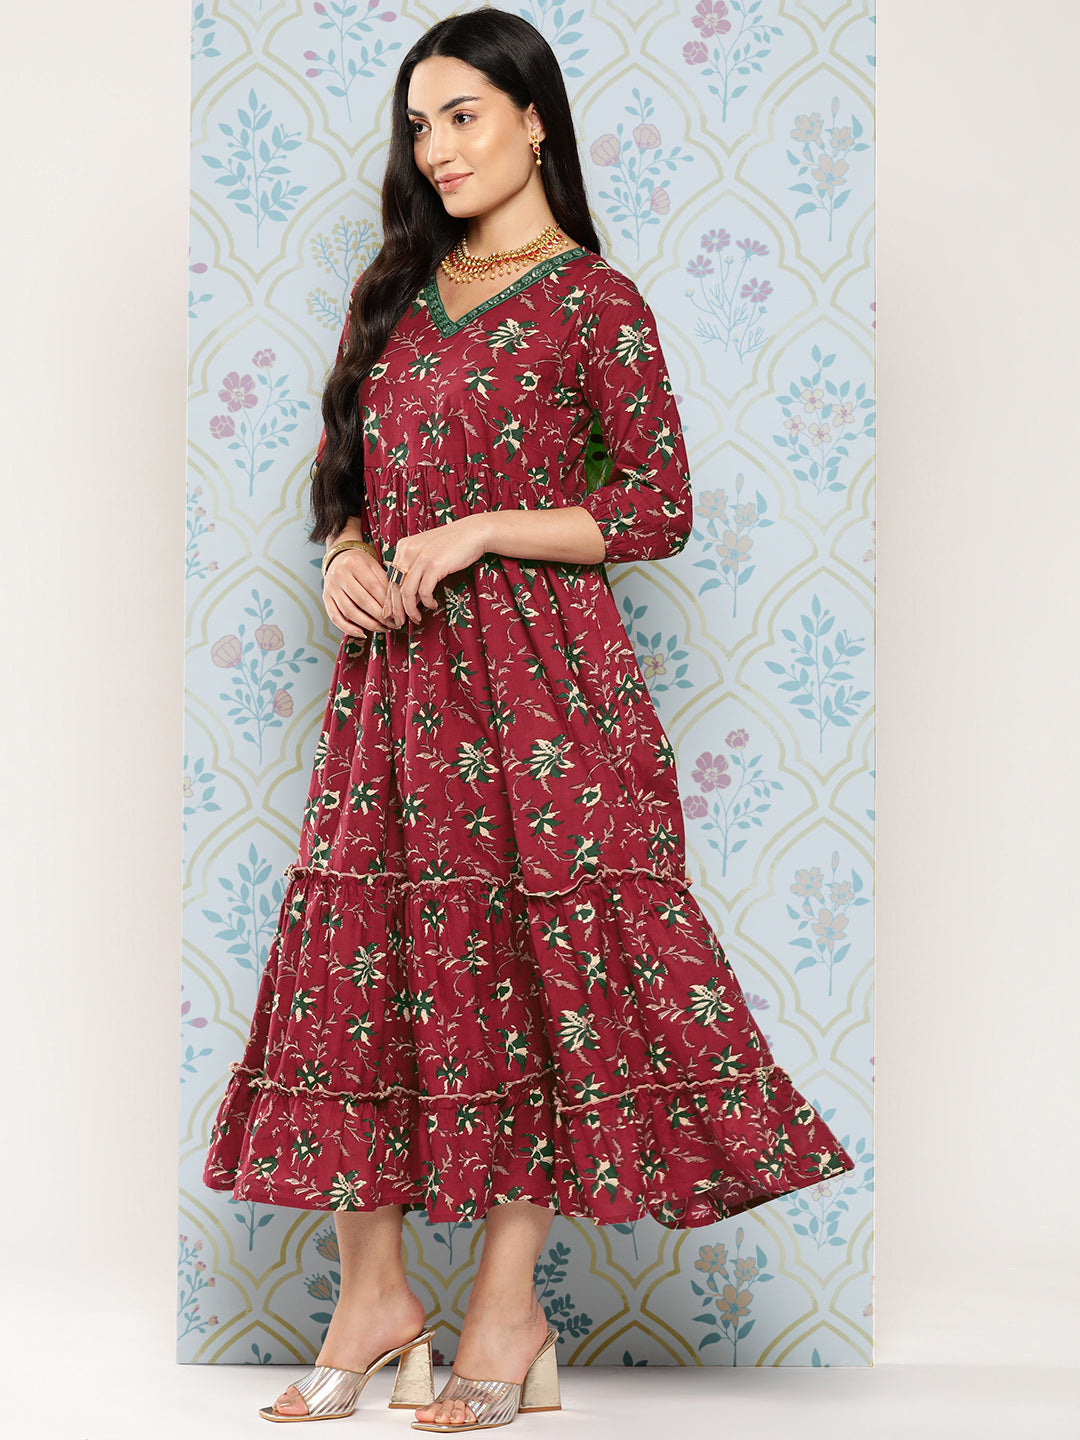 Women's Maroon Floral Fit And Flare Dress - Yufta